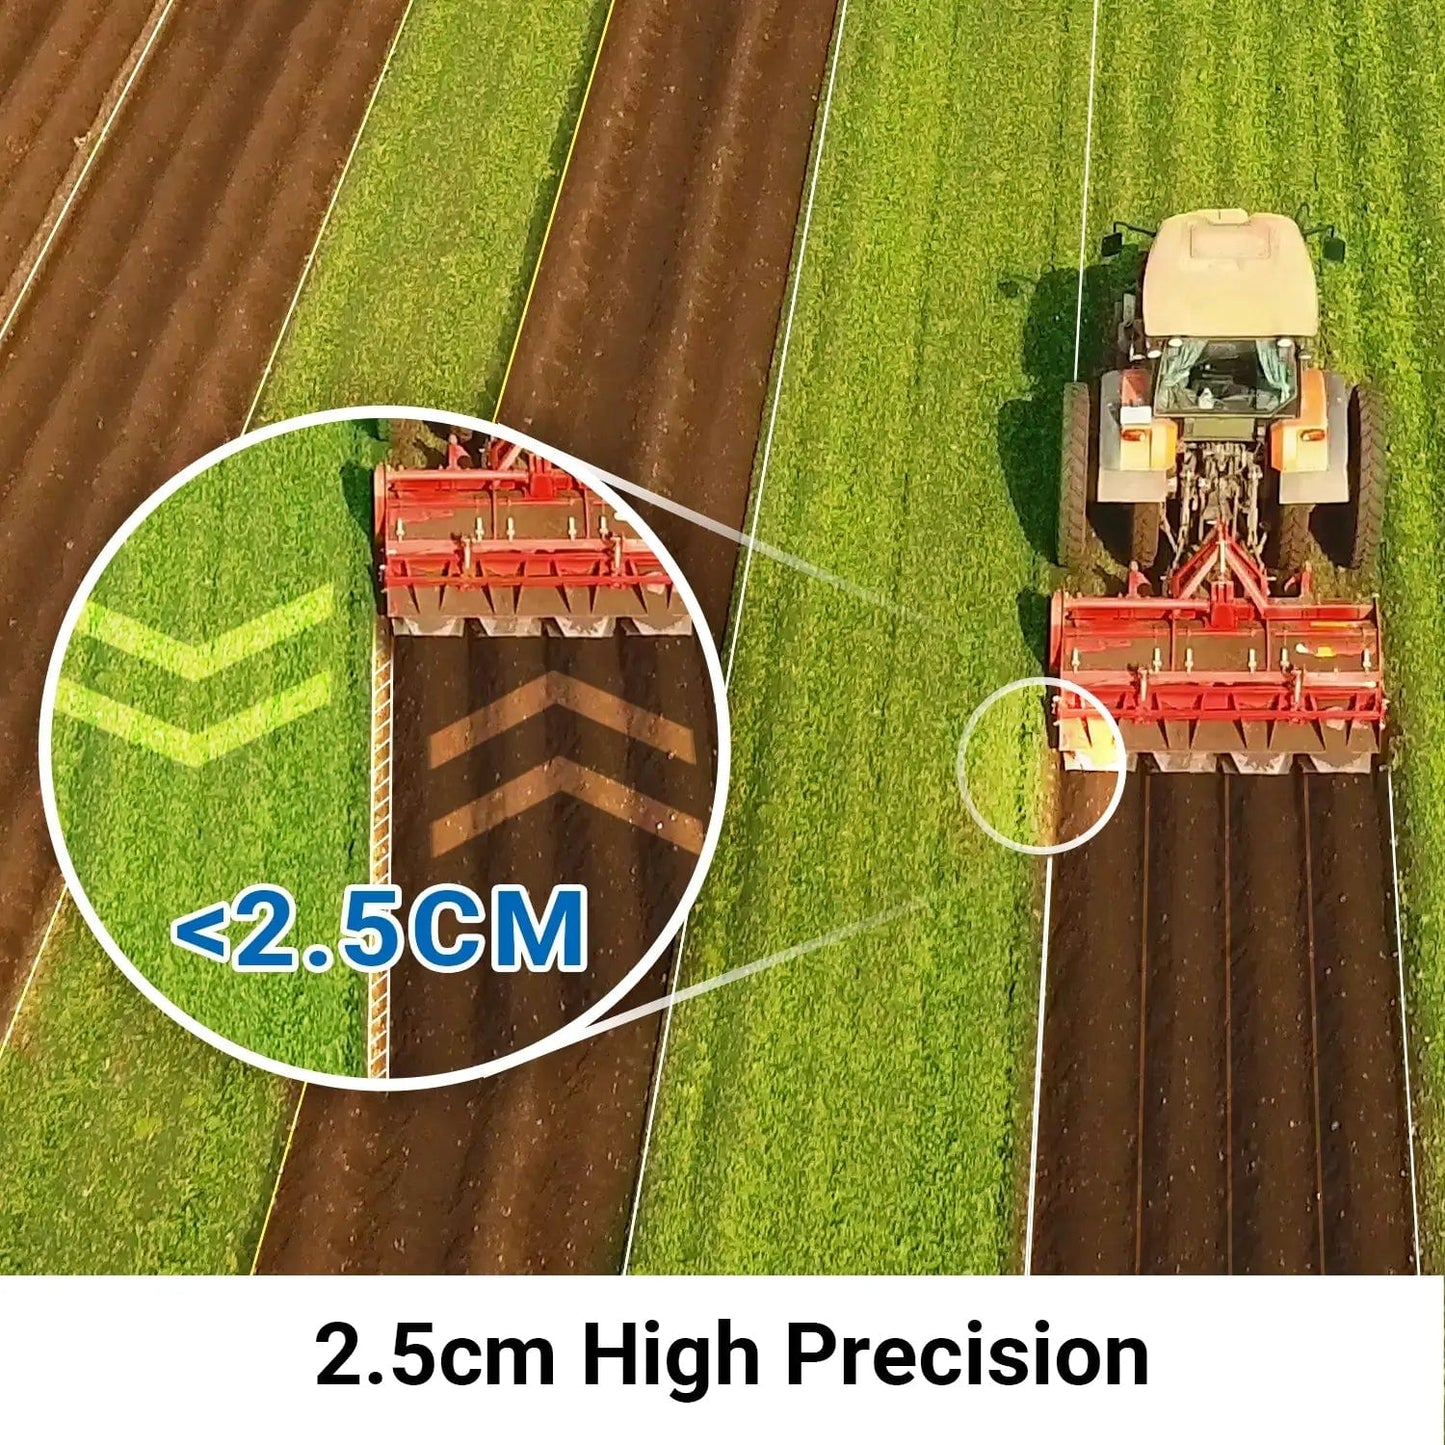 F100 Tractor Auto Steer System with Advanced Mode